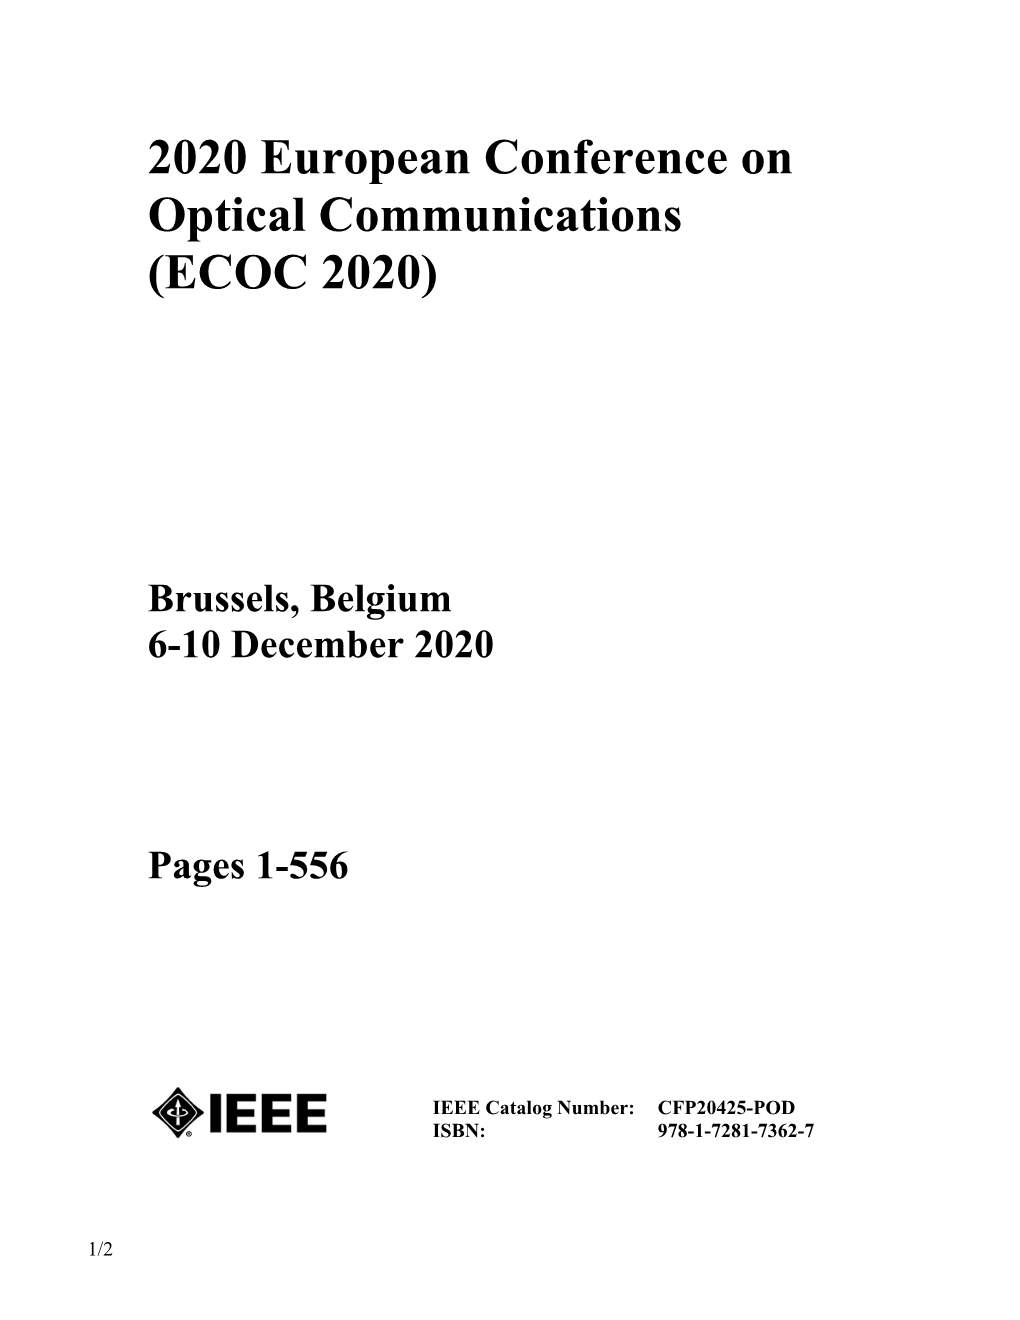 2020 European Conference on Optical Communications